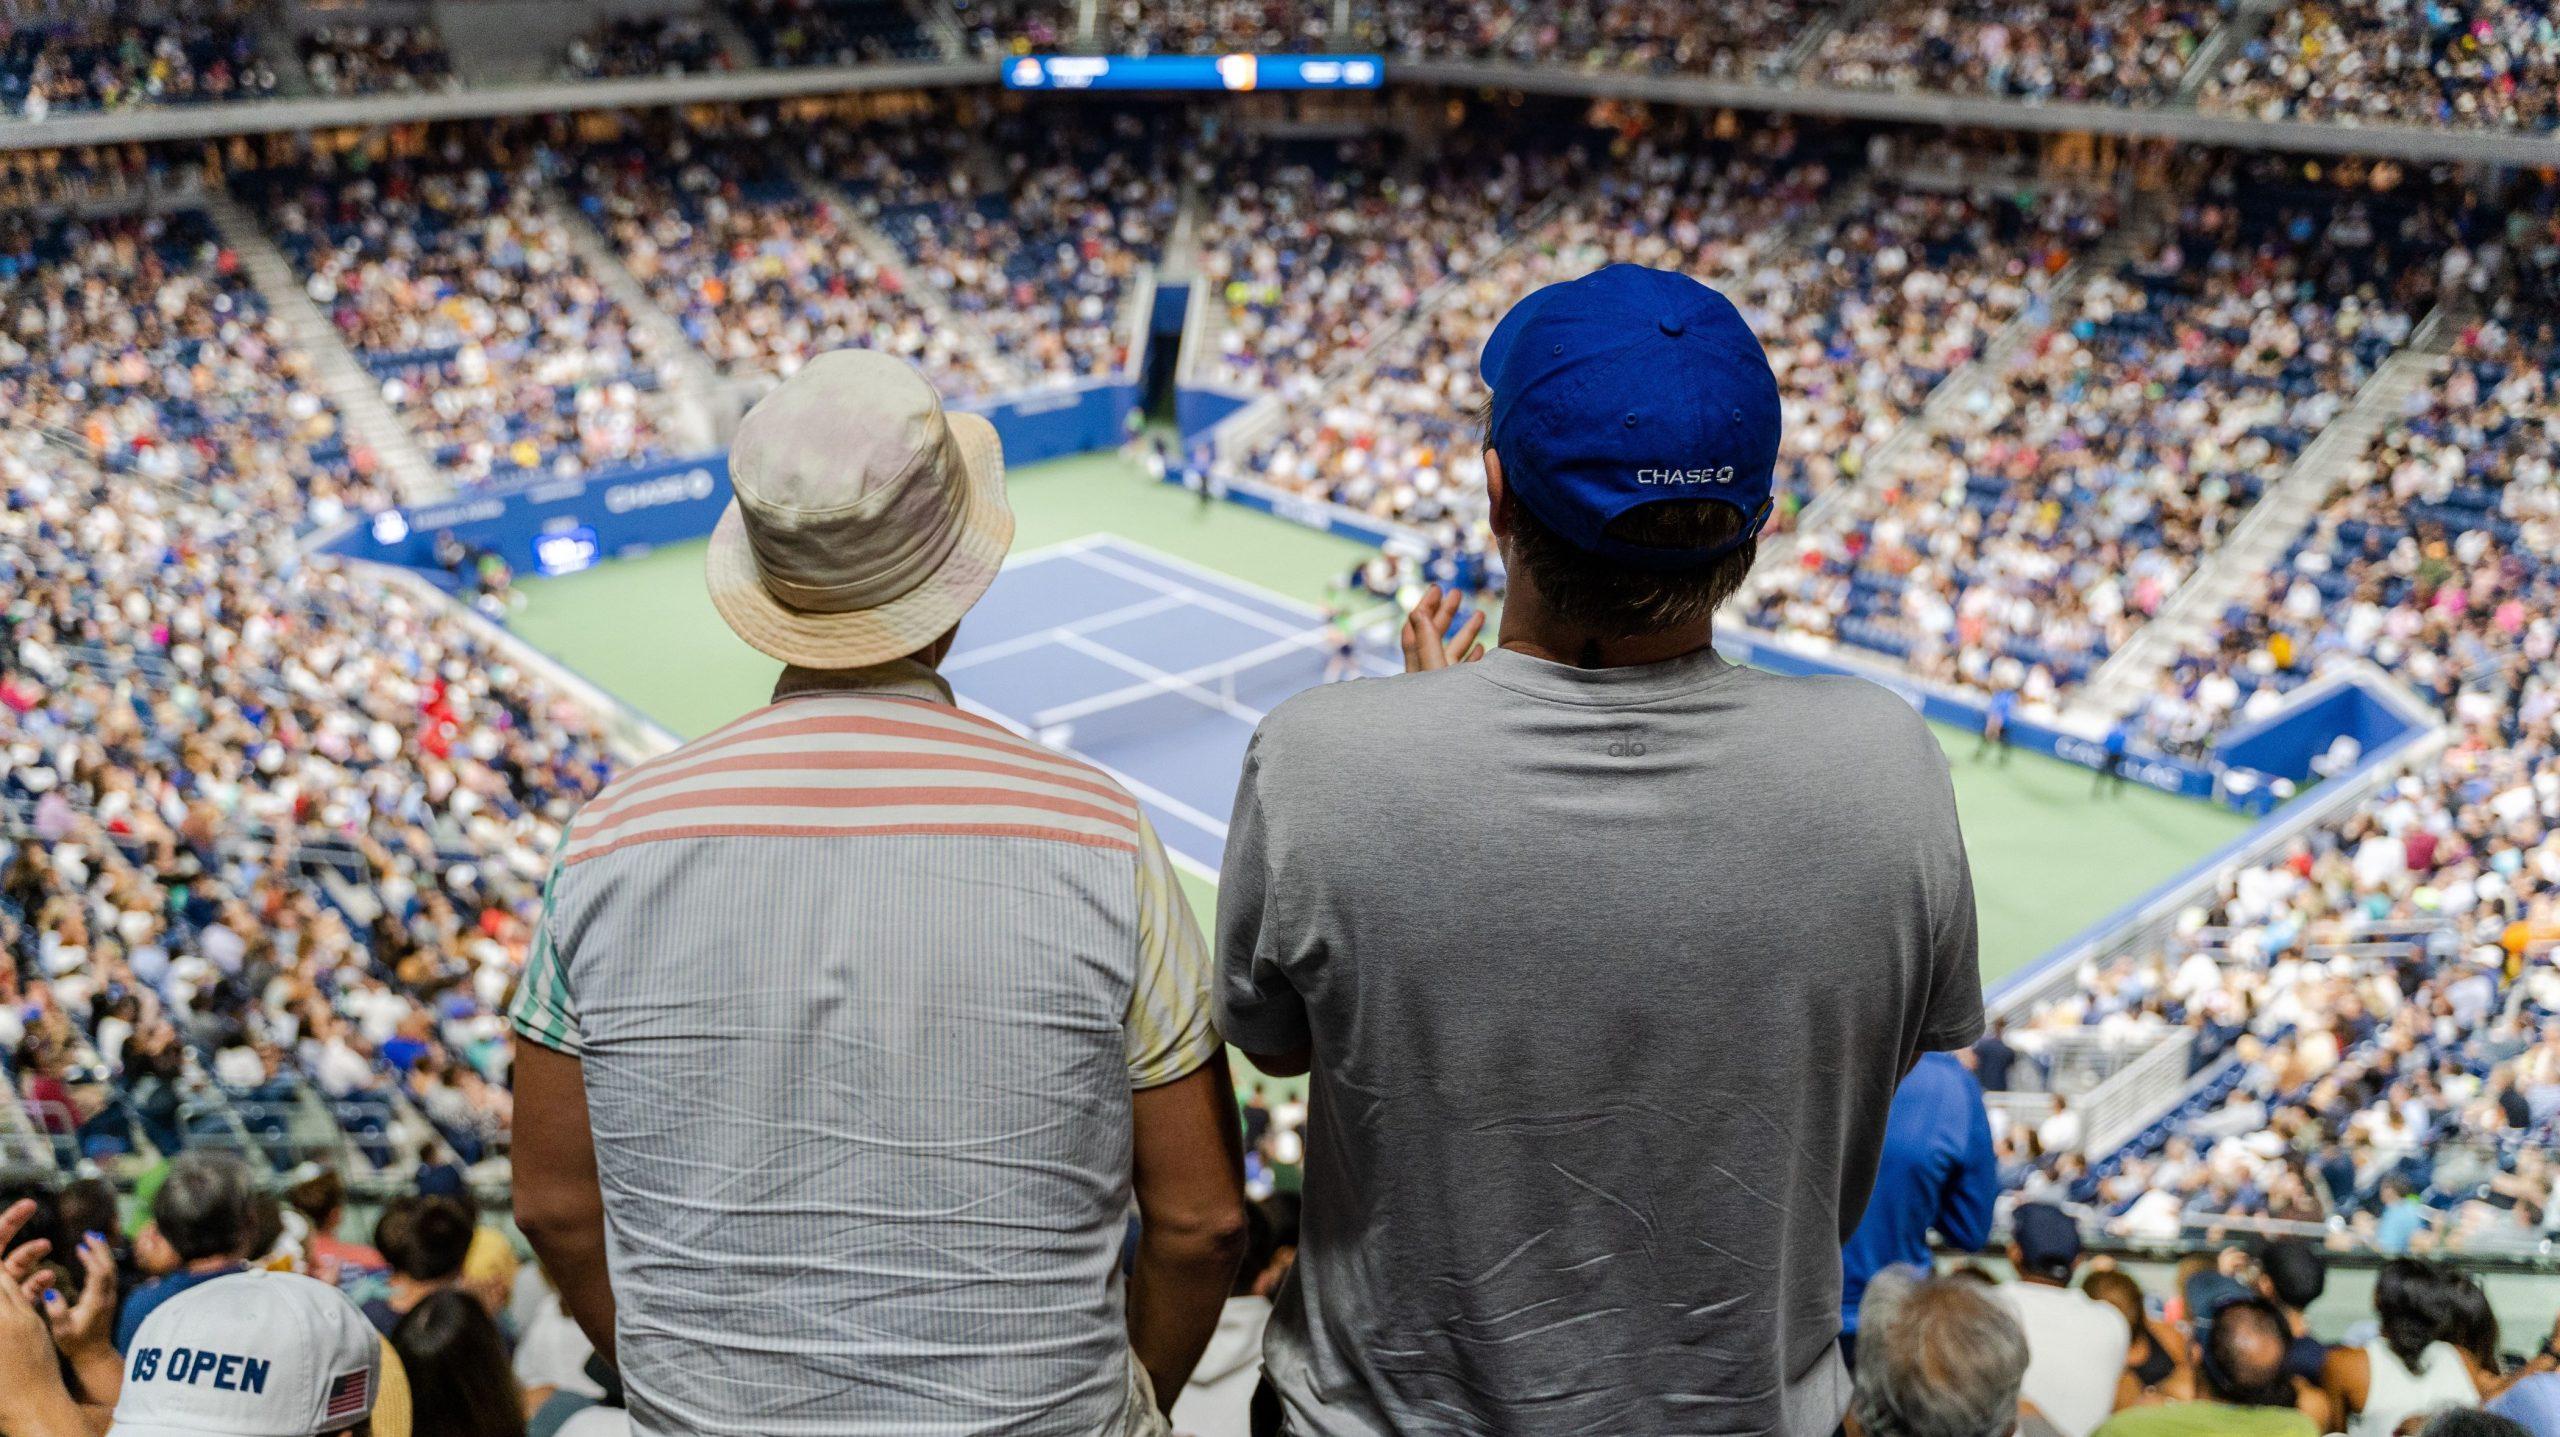 Close up of two spectators watching a match during the US Open tennis tournament.